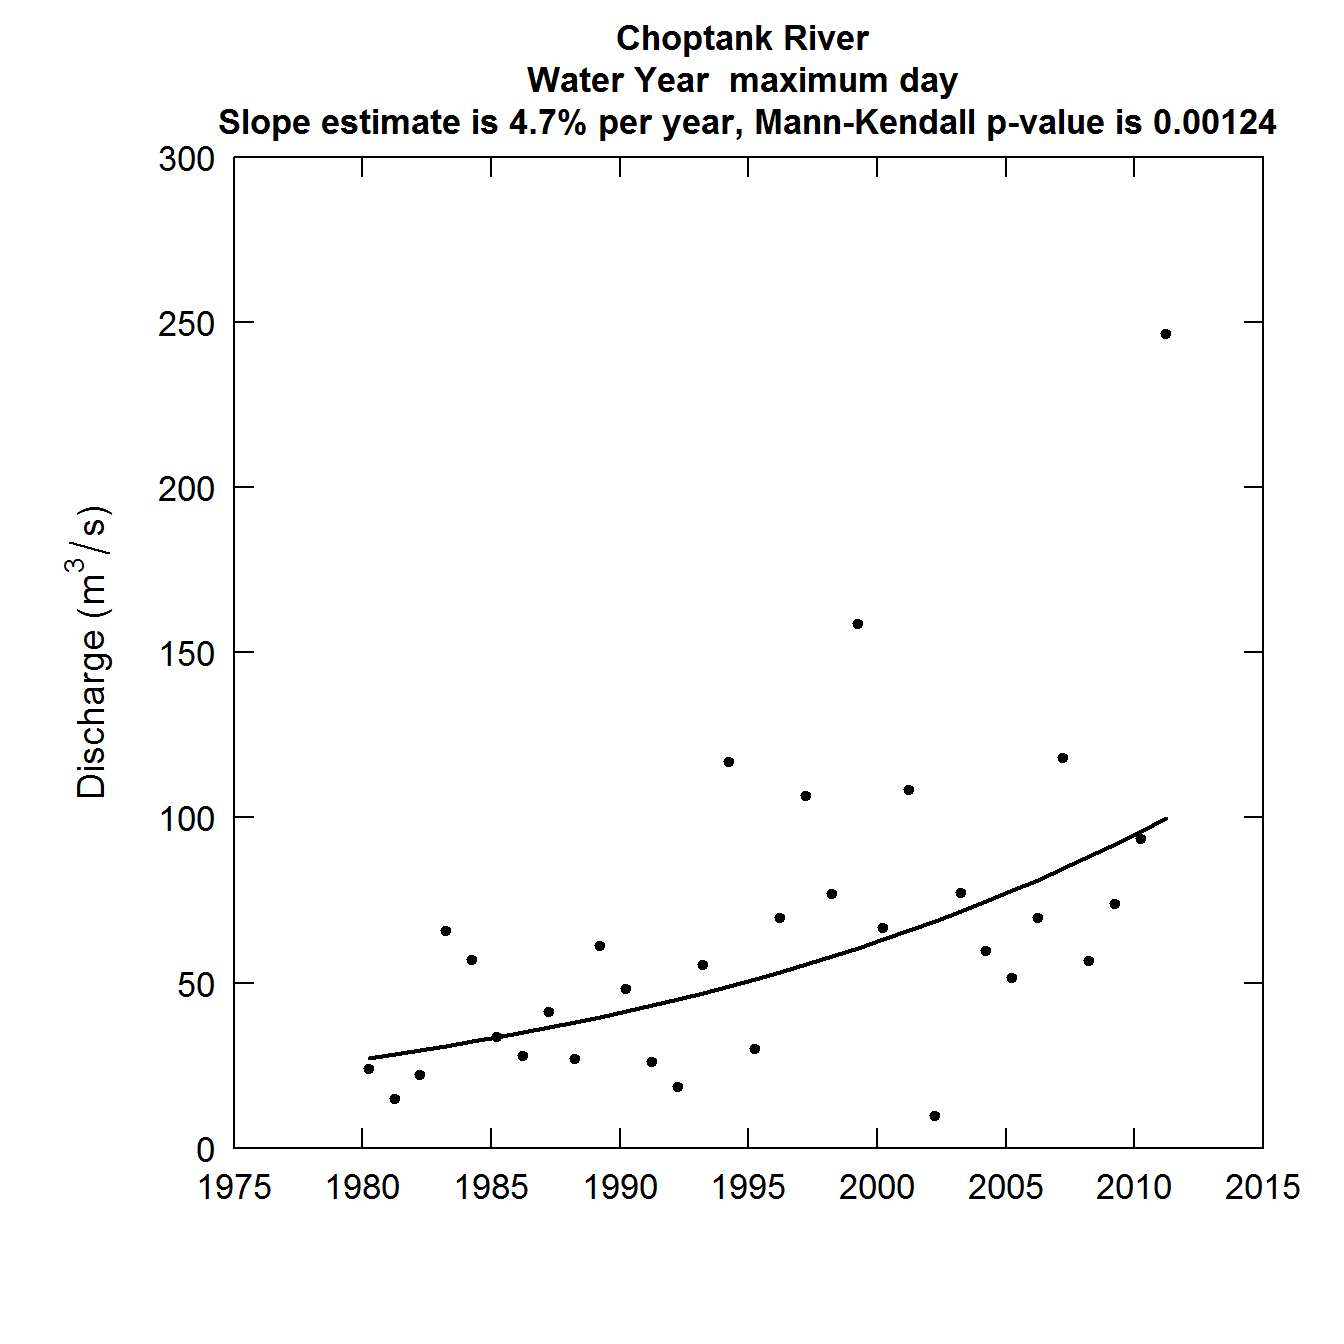 Discharge as a function of Year annual maximum day